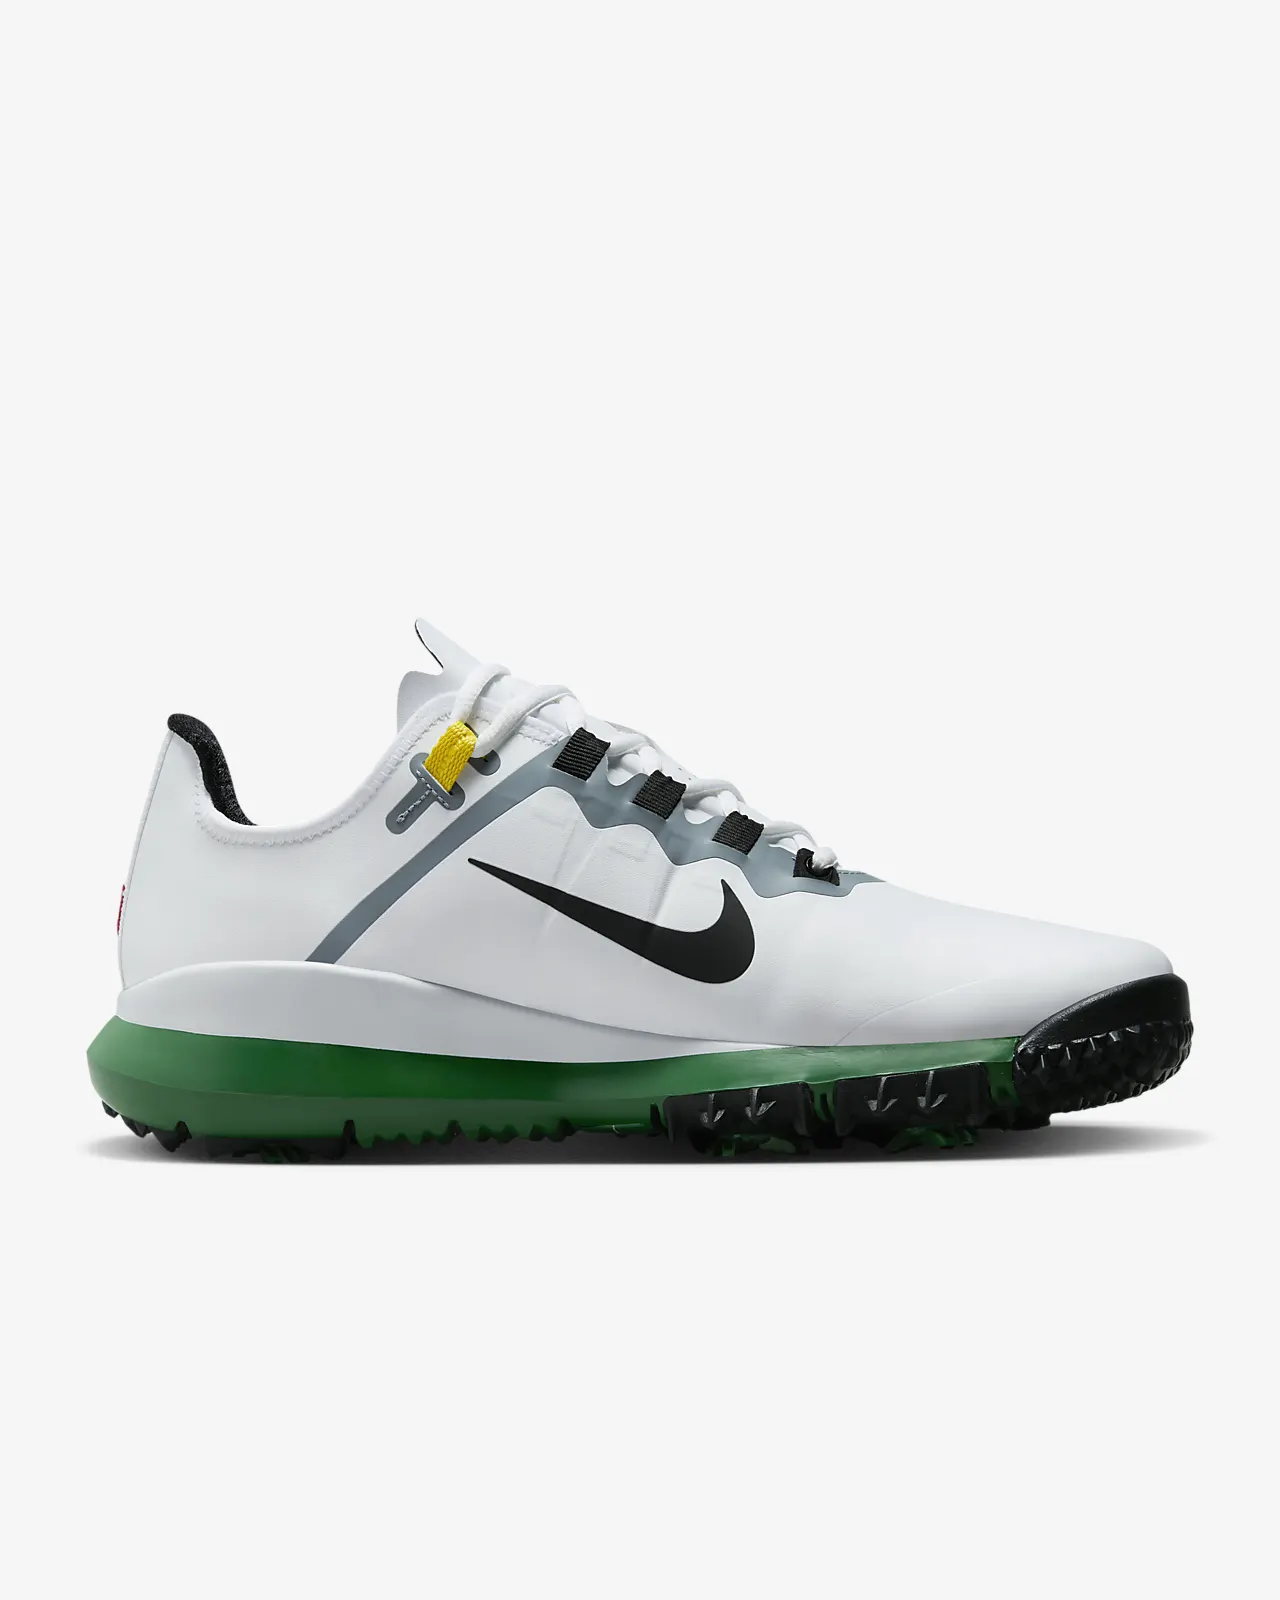 10 Most Expensive Golf Shoes You Can Buy - Rarest.org